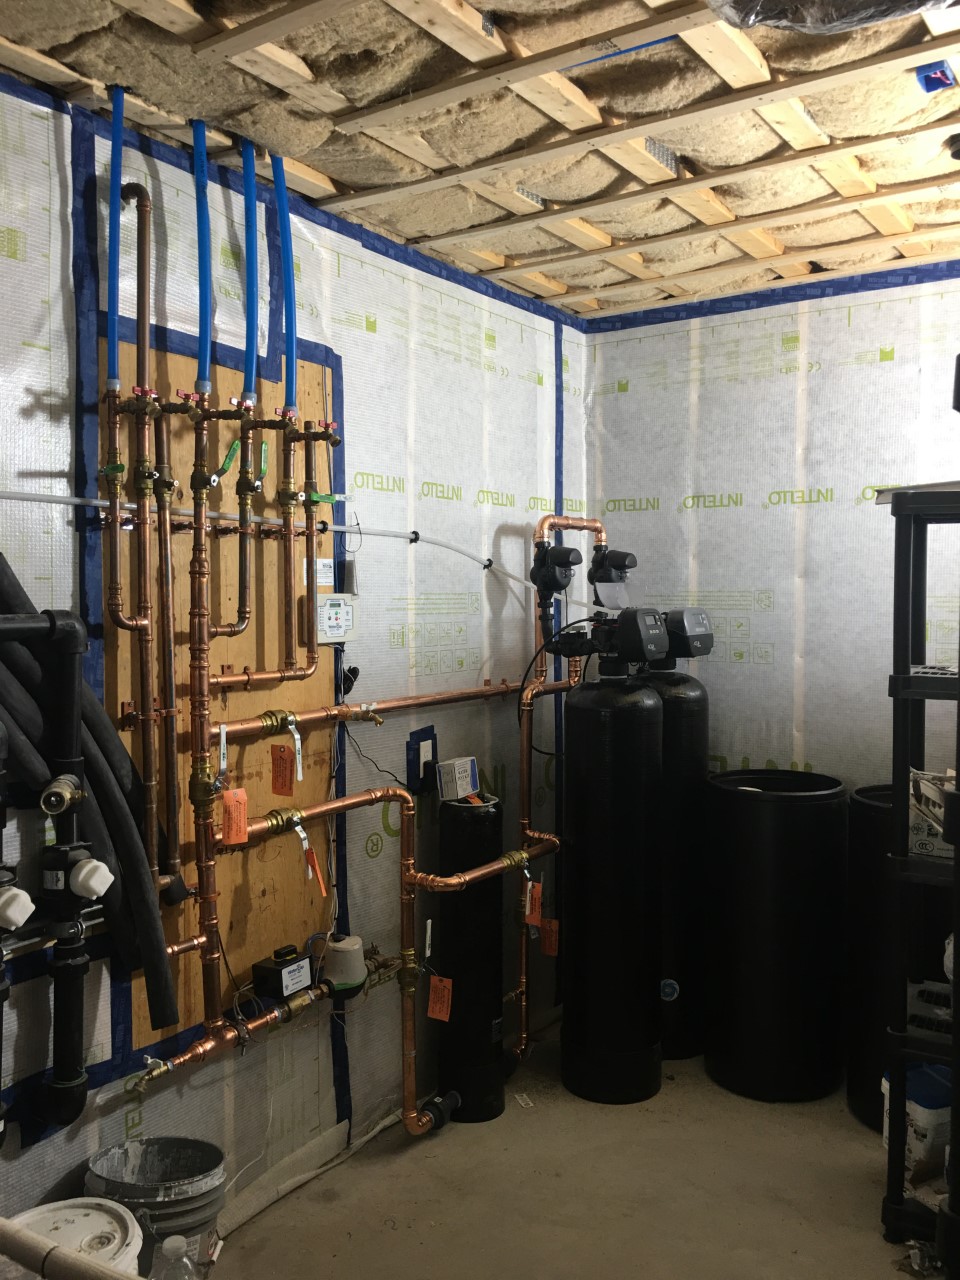 New construction - 2 cubic feet combination water softener/carbon filtration system for public water supply with hard water and very noticeable chlorine taste & smell along with large capacity sediment filter for this large home.